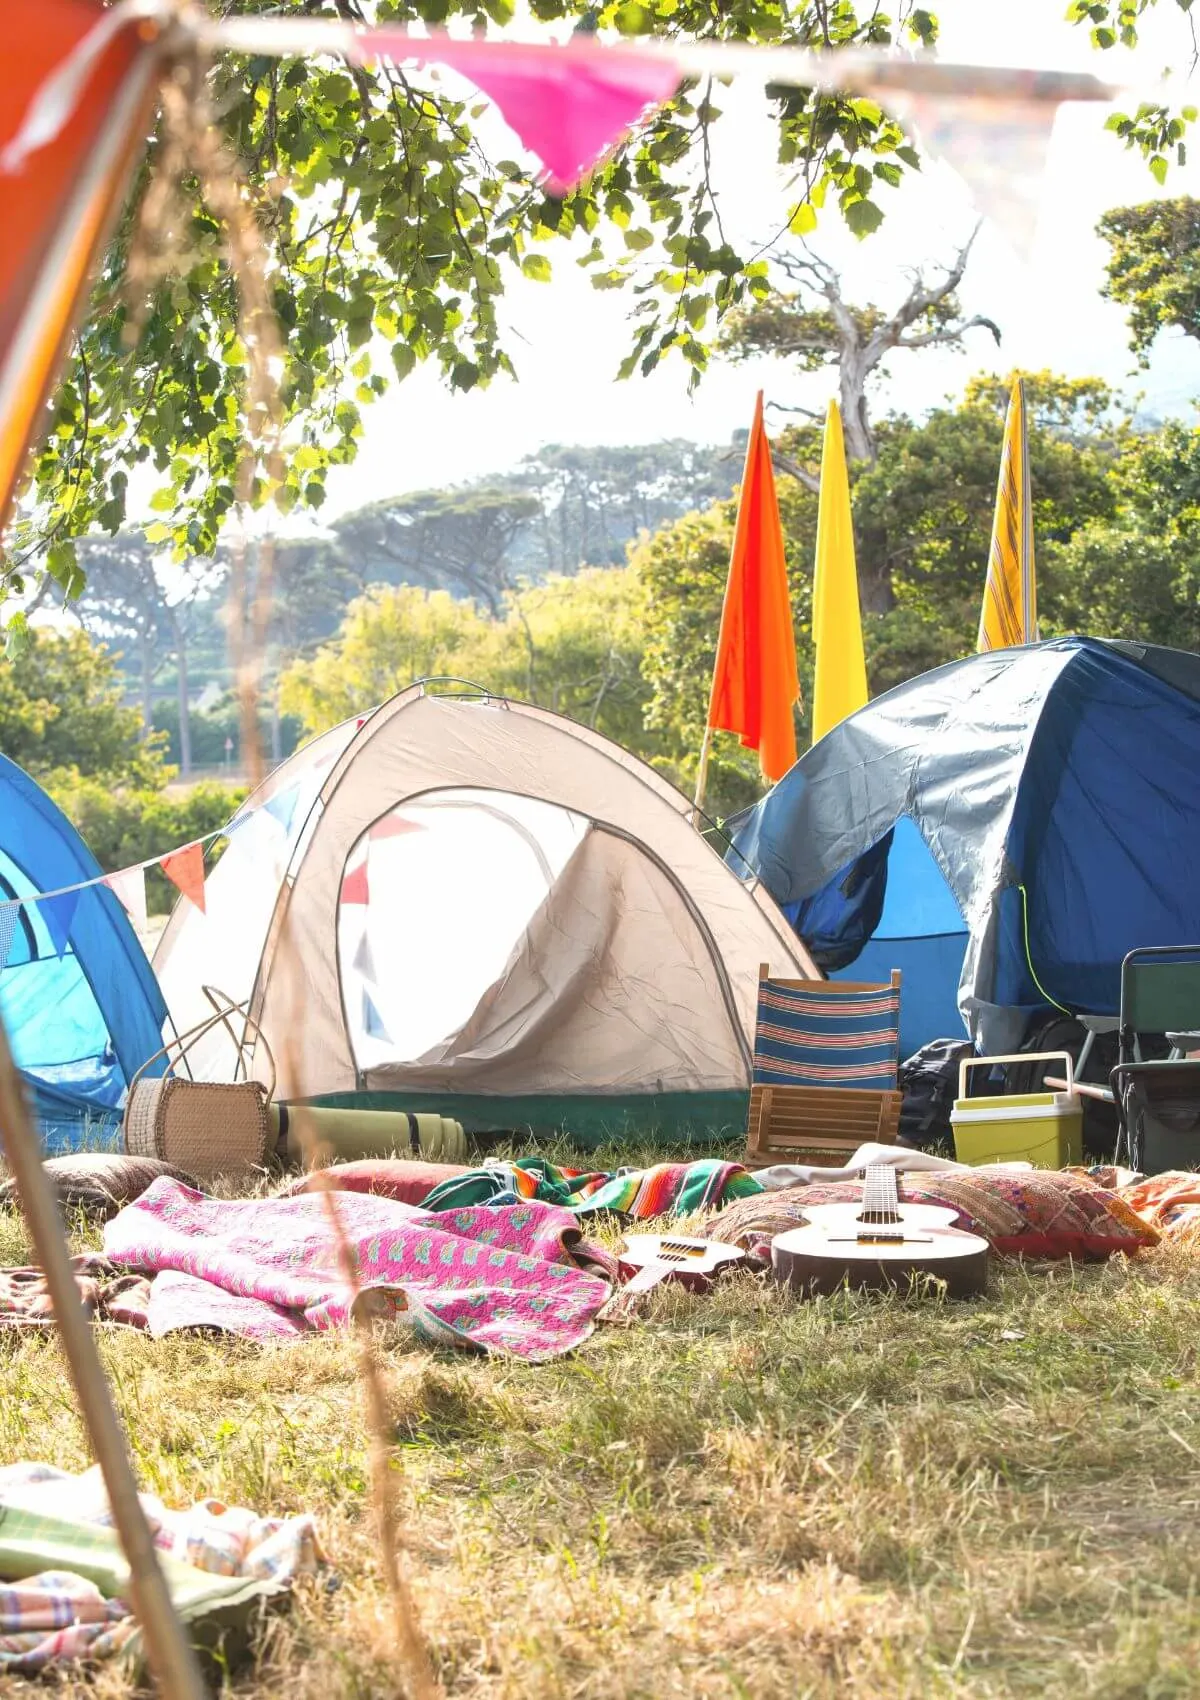 Tips to Find the Place Camp Festivals